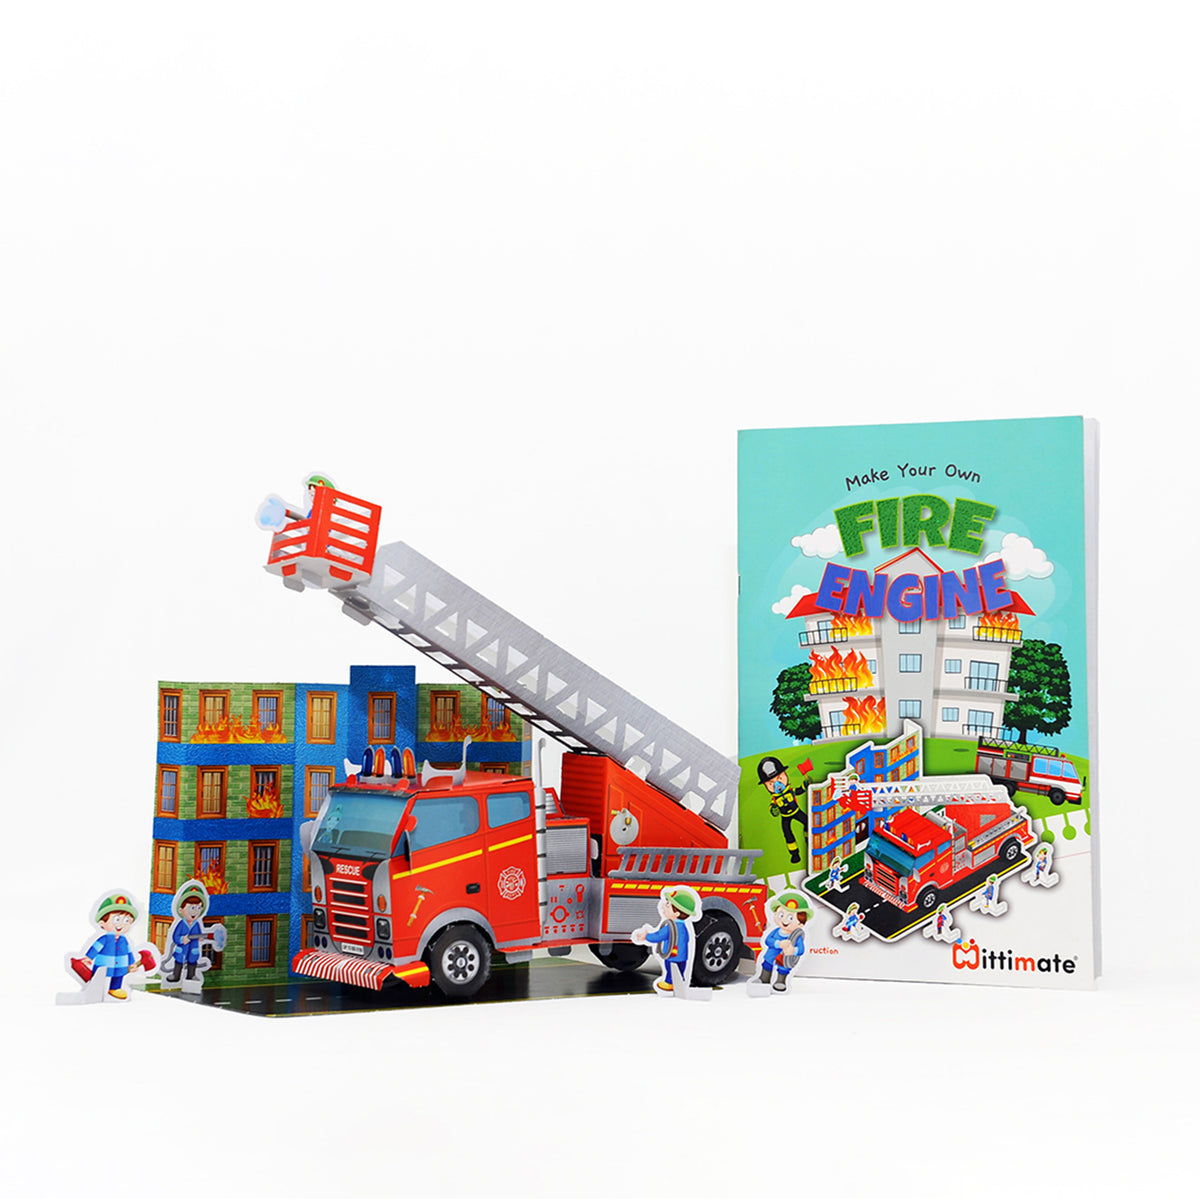 Fire Engine - Make Your Own | Fun & Learning | Kids Activity Books